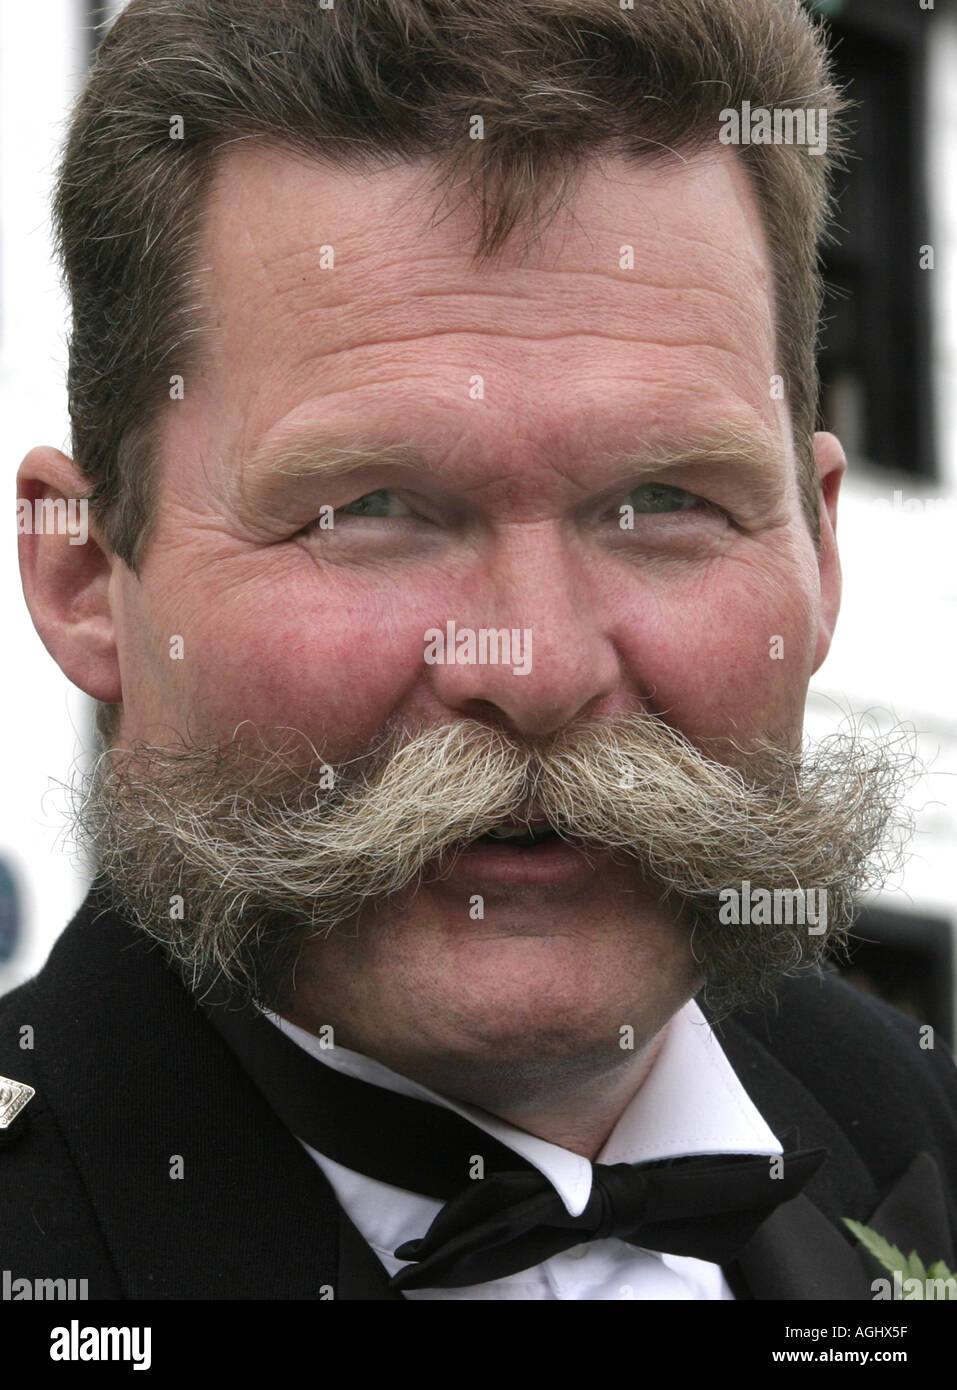 a-rugged-red-faced-man-with-a-magnificent-bristling-handlebar-moustache-AGHX5F.jpg